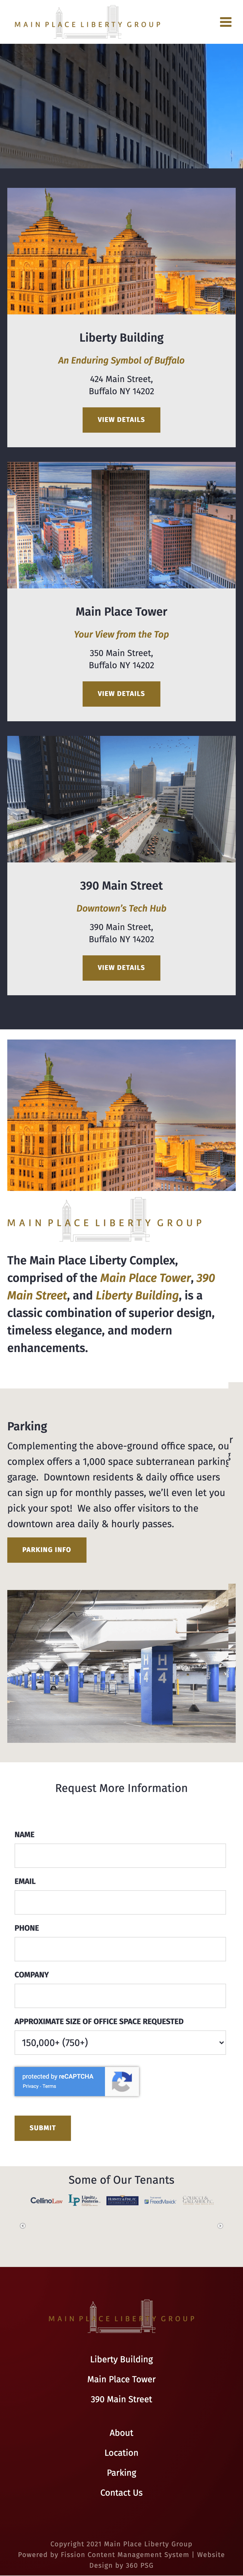 Main Place Liberty Group Website - Mobile